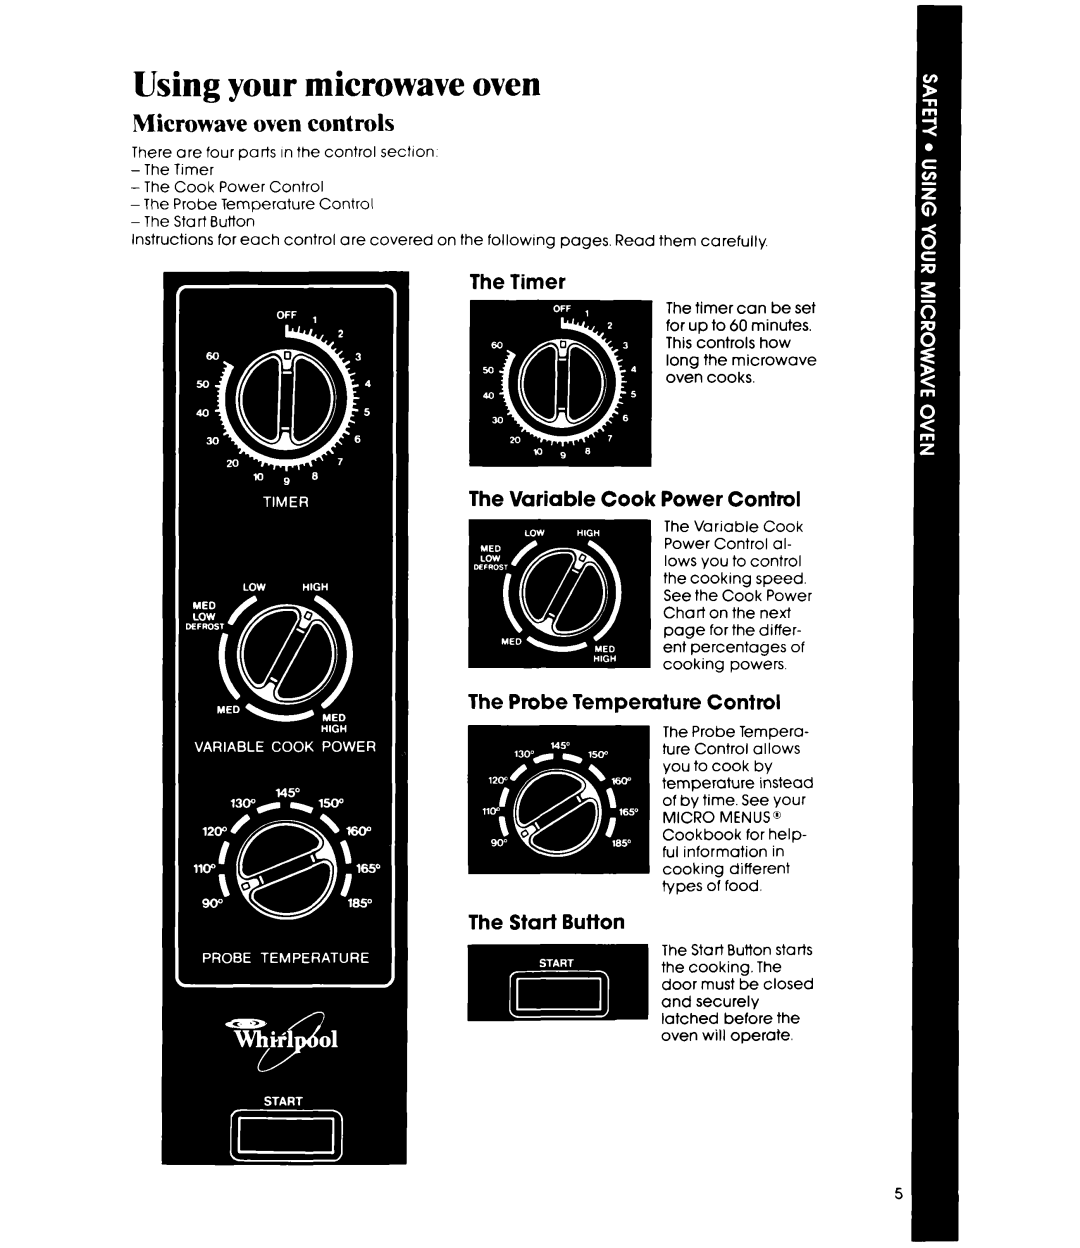 Whirlpool MW8400XR Using your microwave oven, Microwave oven controls, The Variable Cook Power Control, The Start Button 